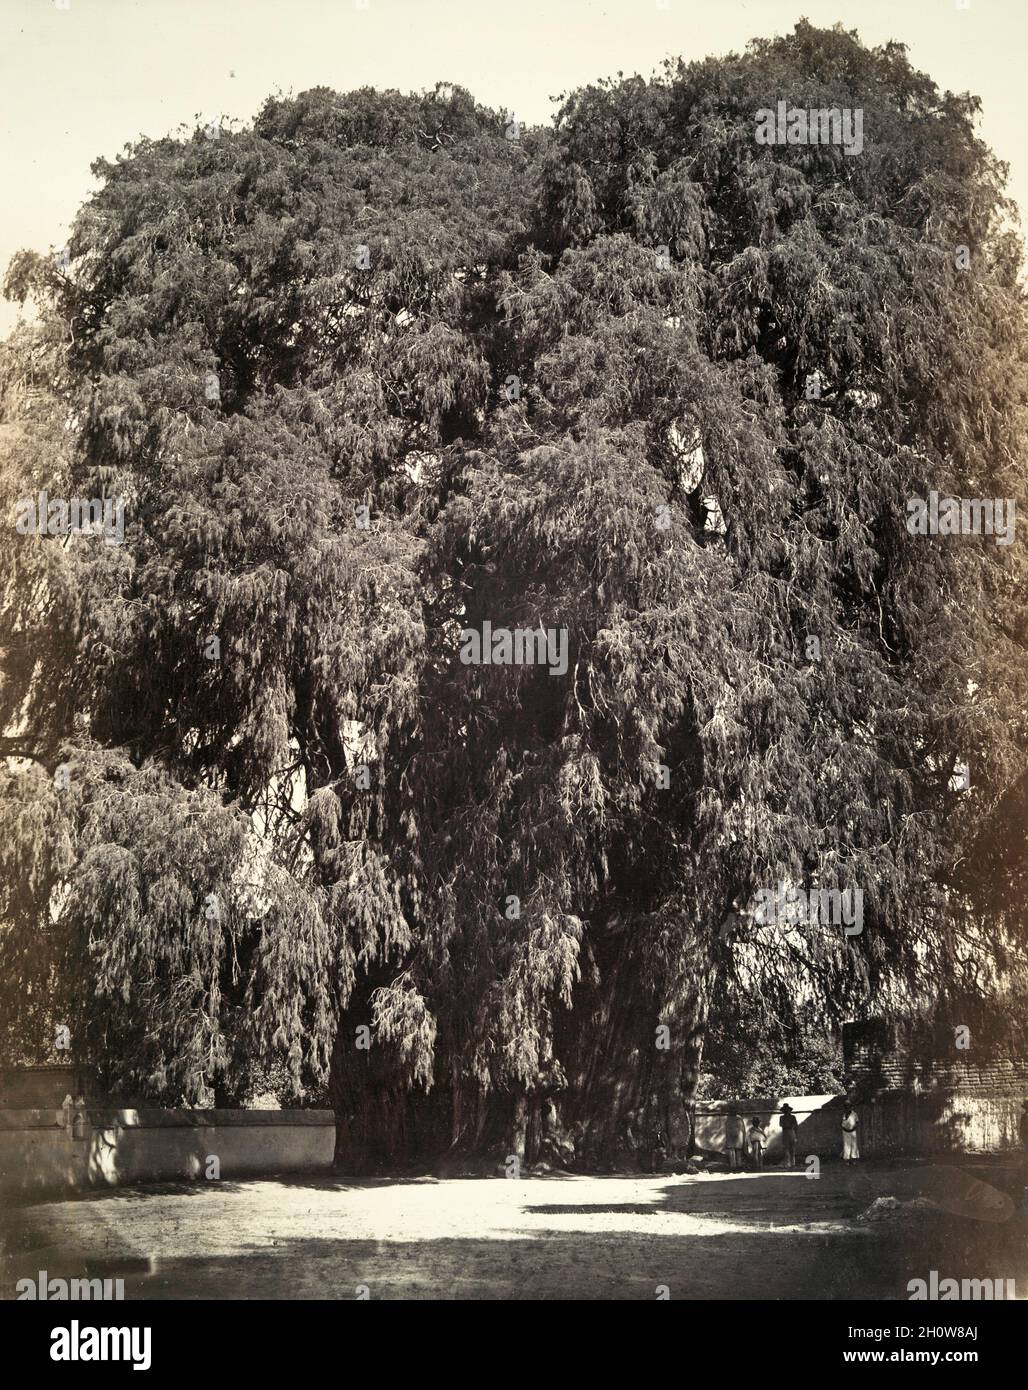 Giant ahuehuete cypress tree at Santa Maria del Tule, near the city of Oaxaca, Mexico. Photograph by French archaeologist Désiré Charnay ca. 1862-1863 Stock Photo